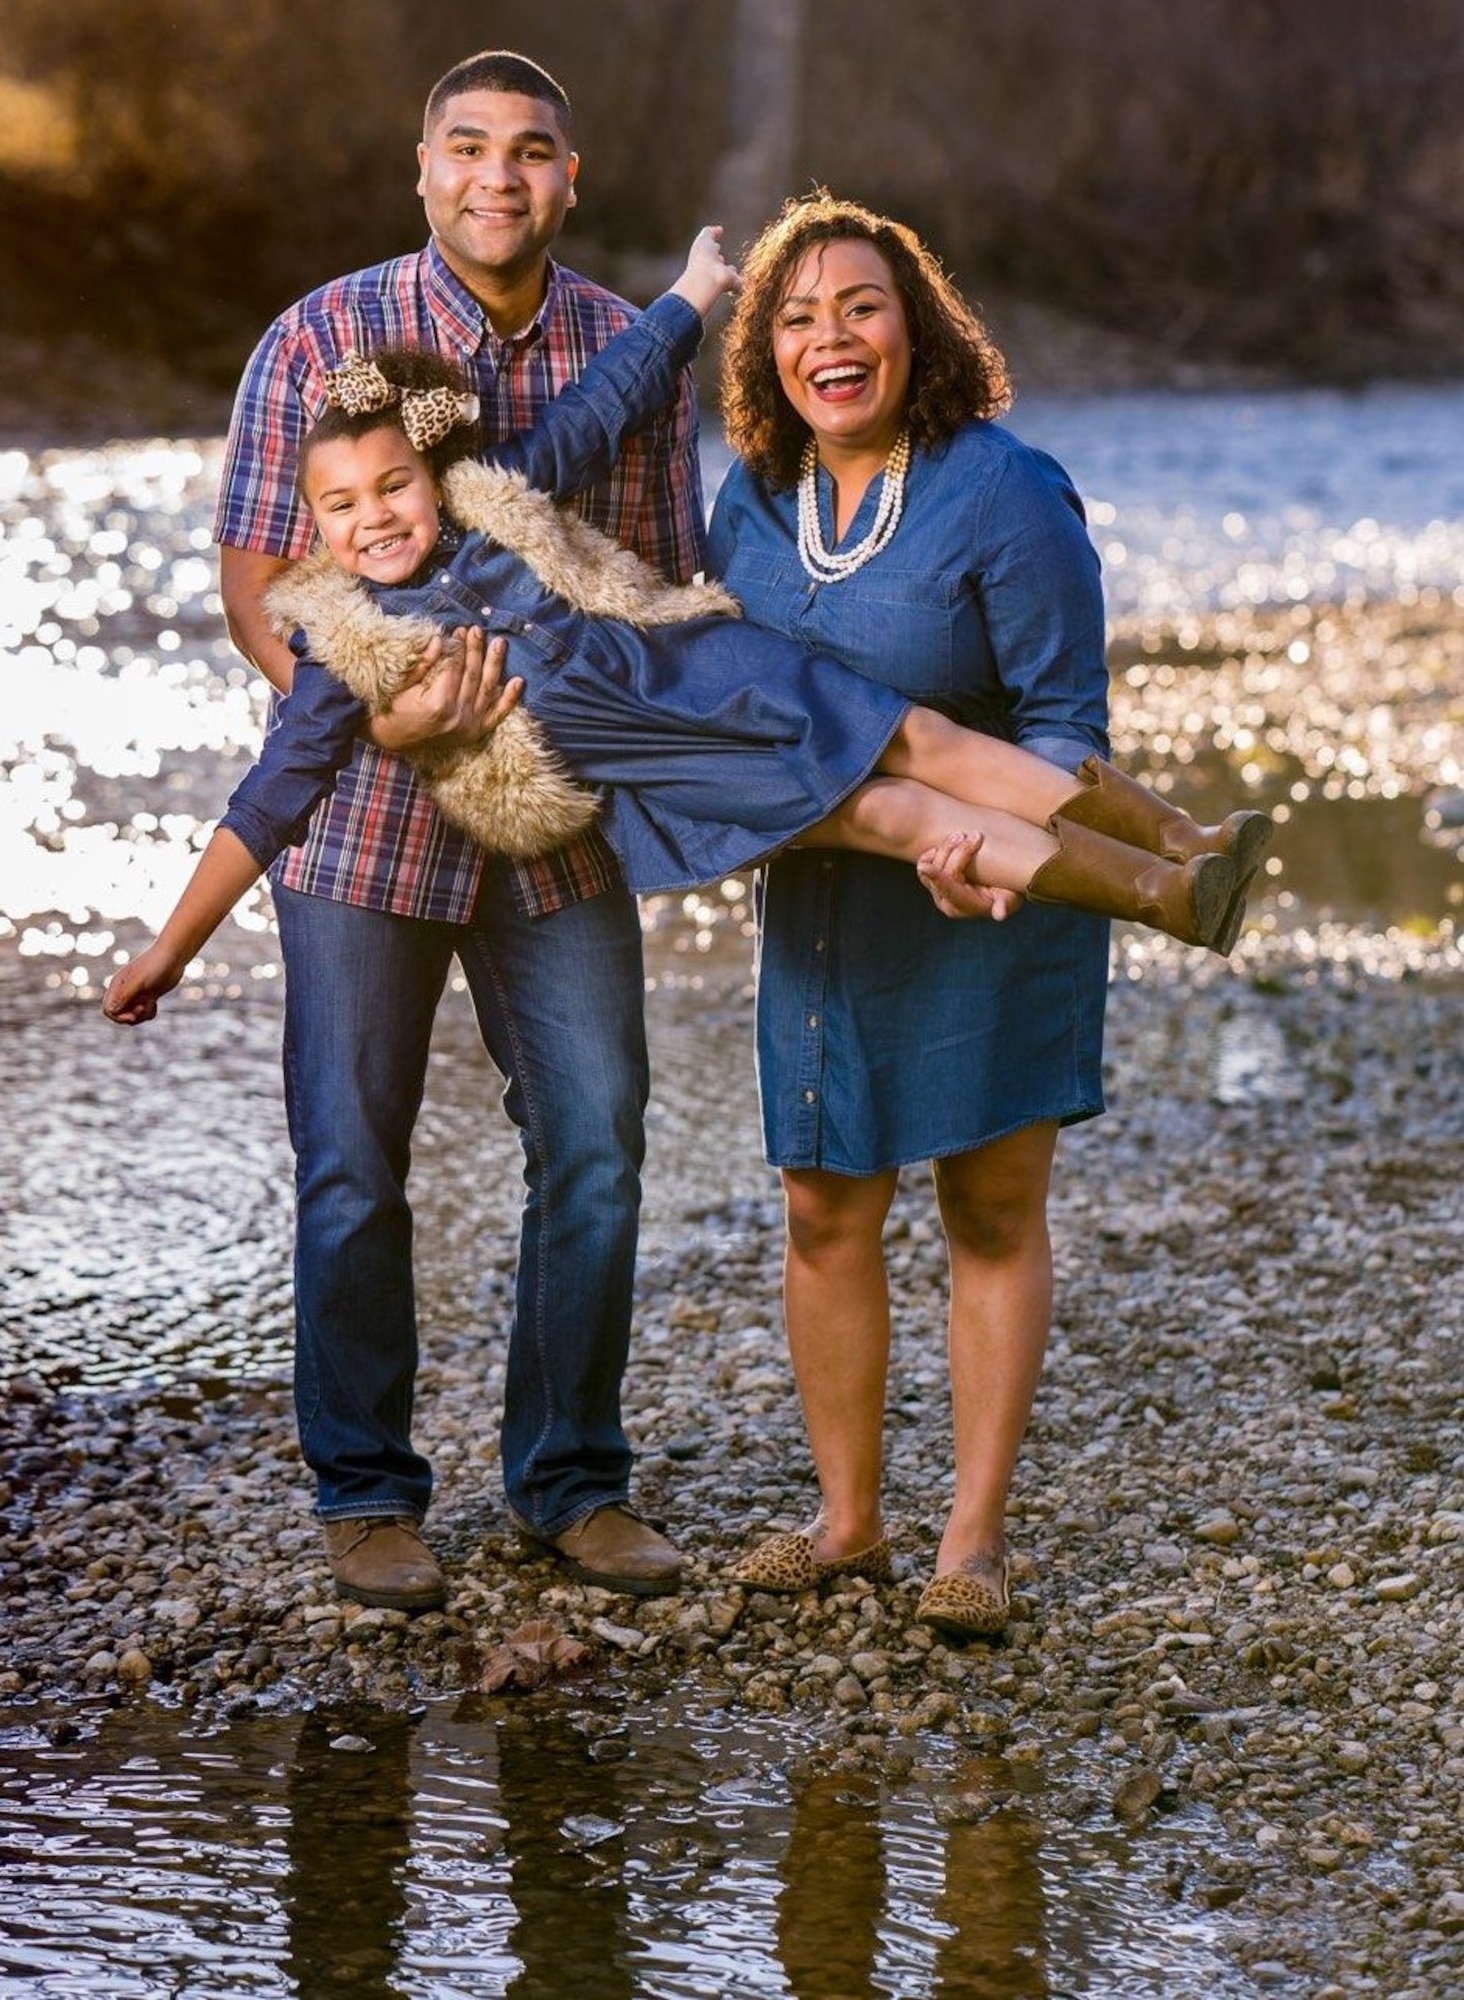 Master Sgt. Carlos Fernandez-Martinez, his wife Ashley and daughter Davyn as shown posing for the cover of their community's magazine. The family has purchased a home in Ohio and has built a positive support system with church, friends, and family.